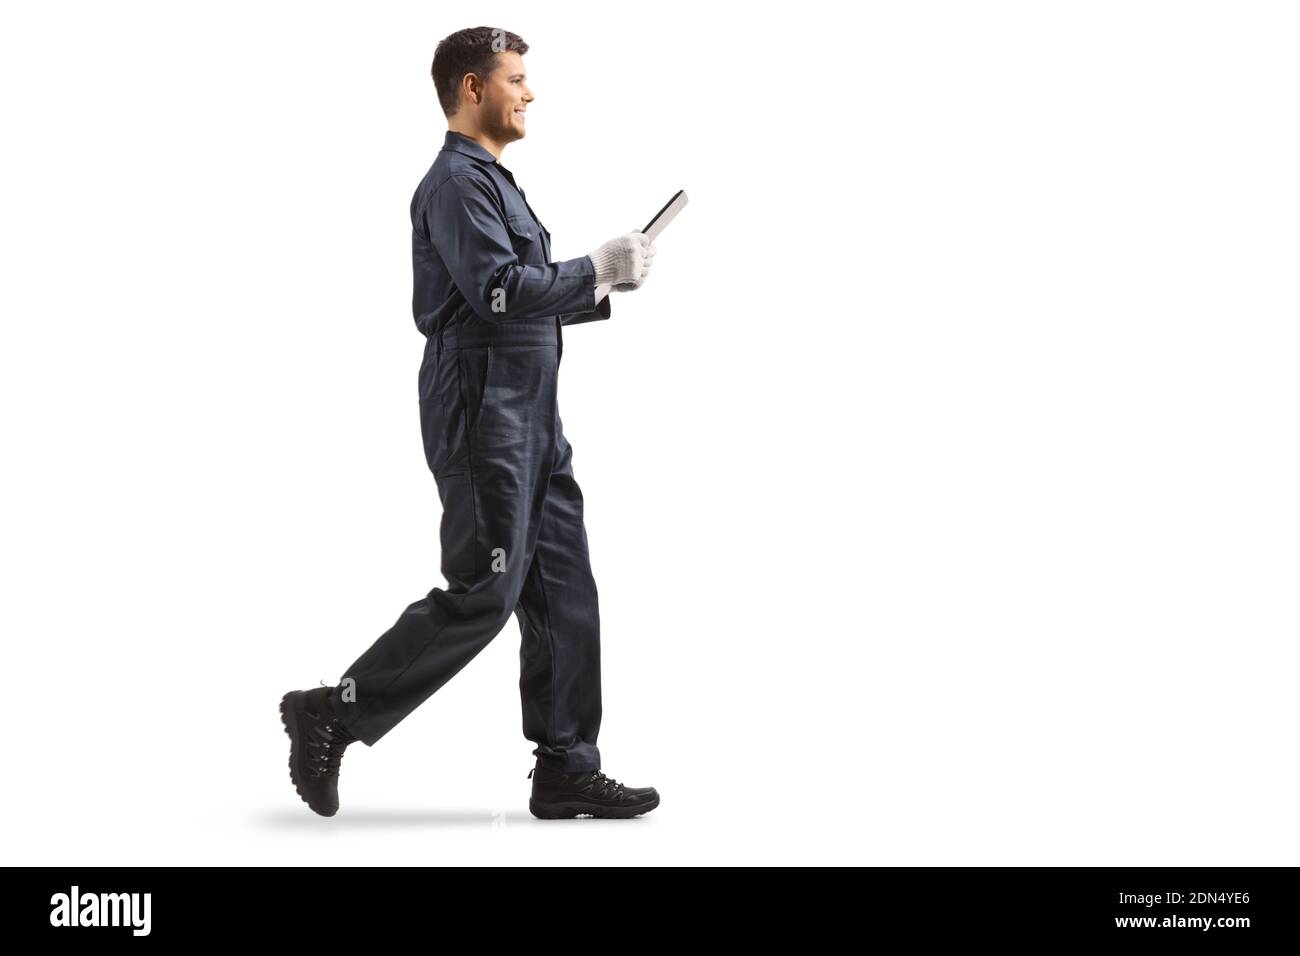 Full length profile shot of a young male worker in an overall uniform holding a clipboard and walking isolated on white background Stock Photo